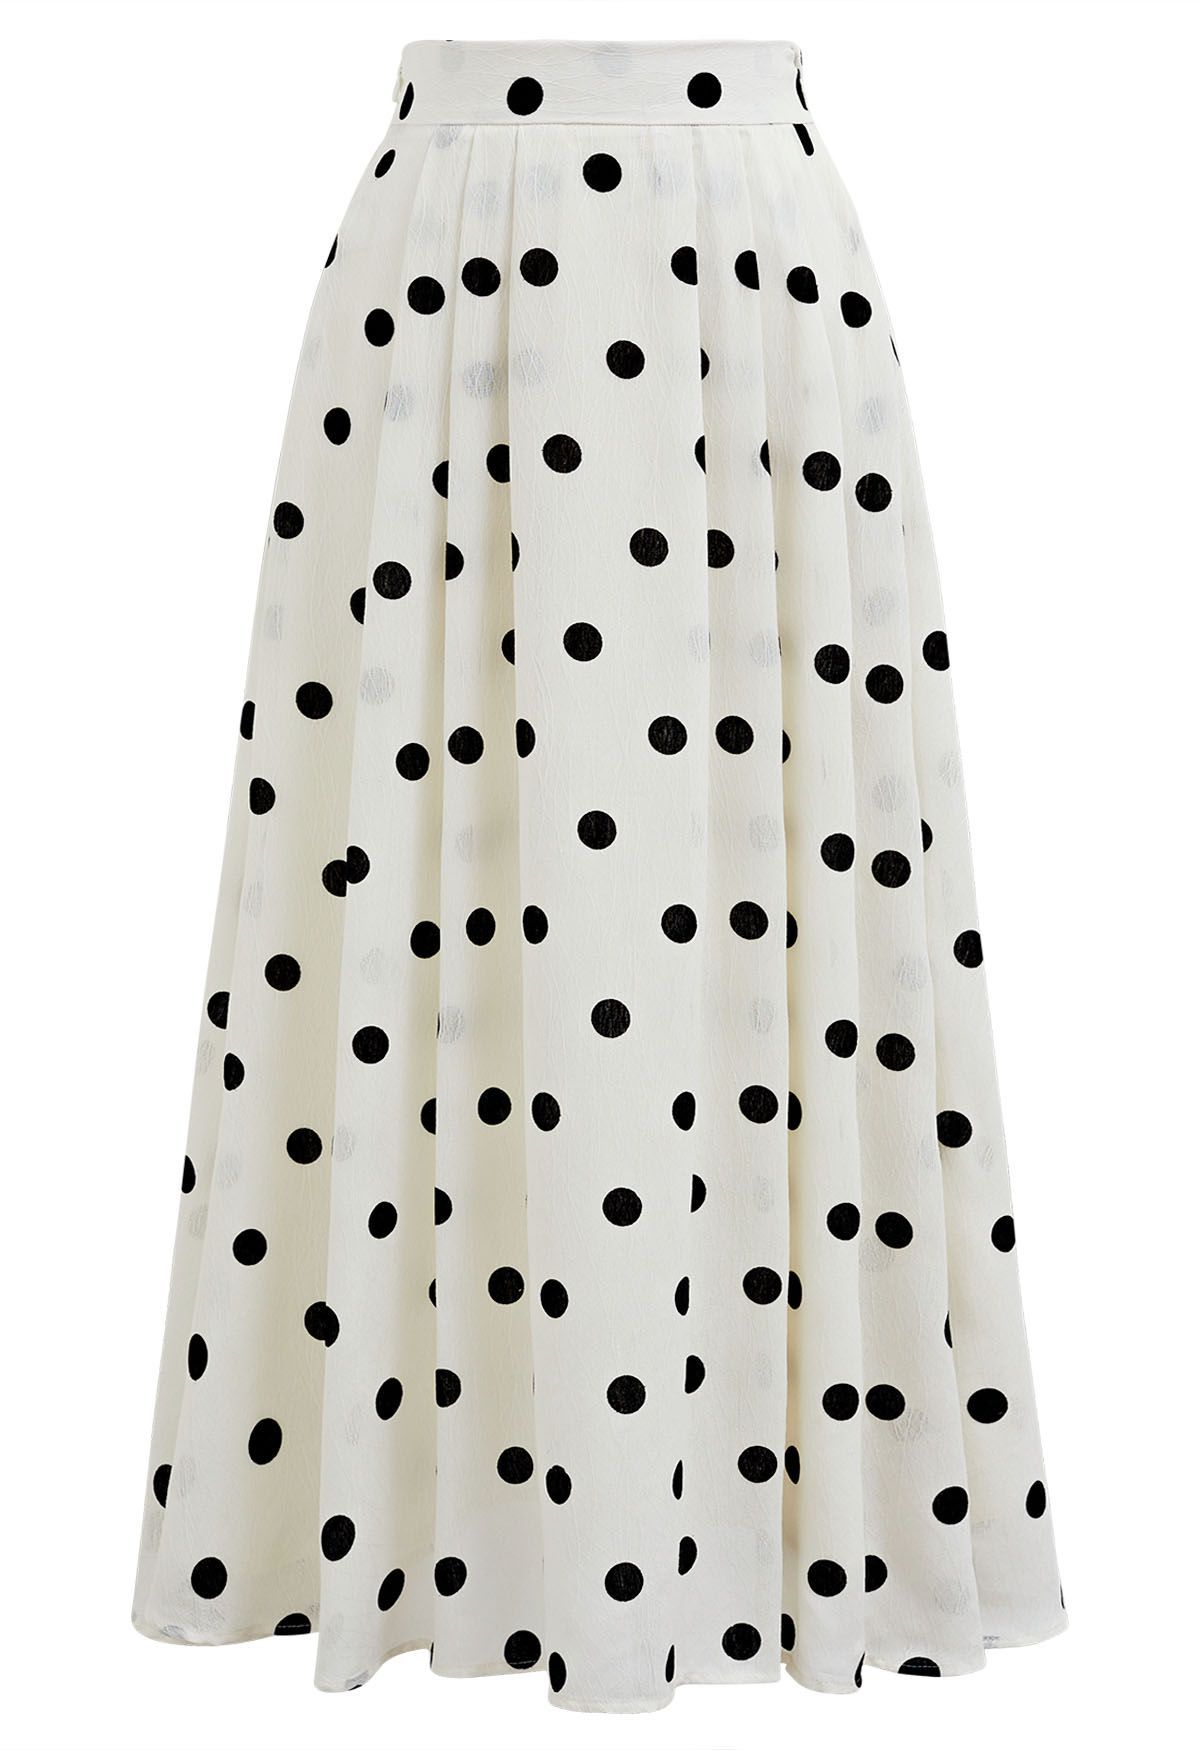 Texture Polka Dot Printed Pleated Maxi Skirt in Cream | Chicwish